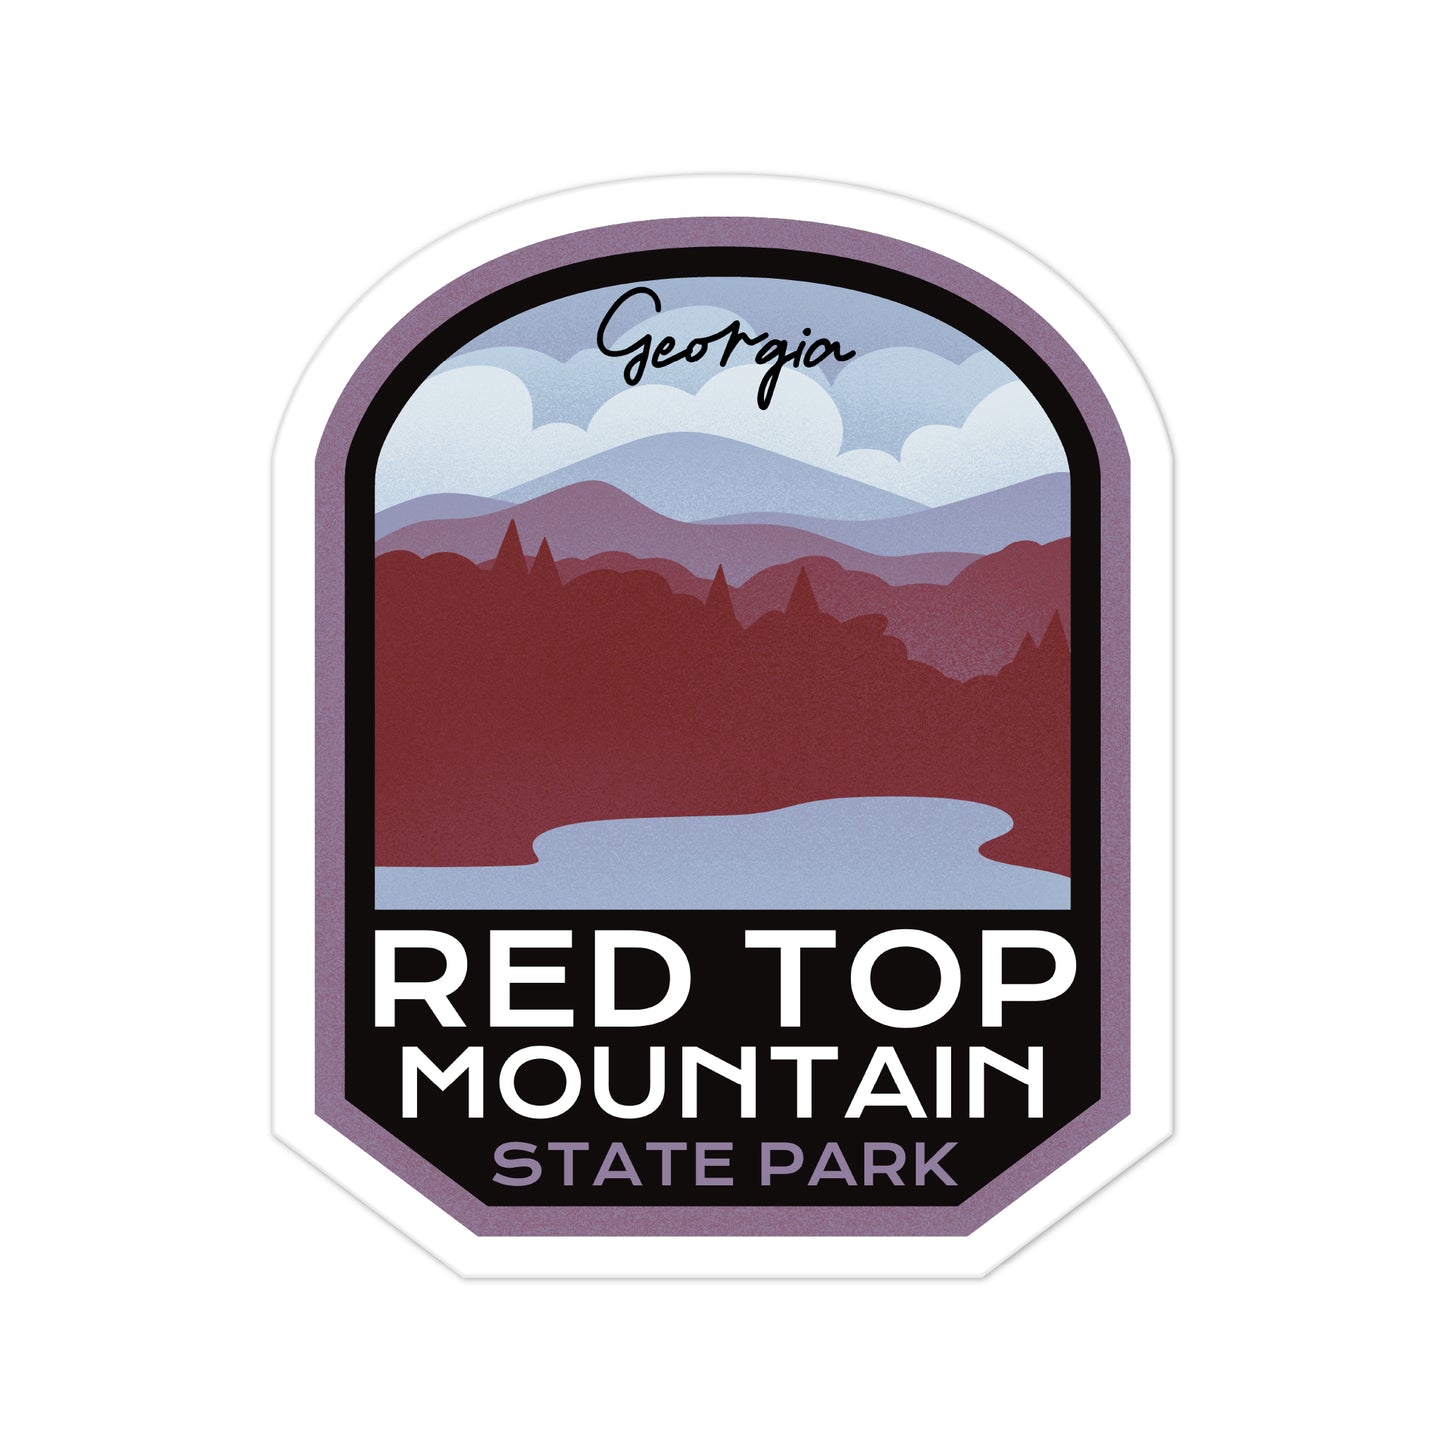 A sticker of Red Top Mountain State Park